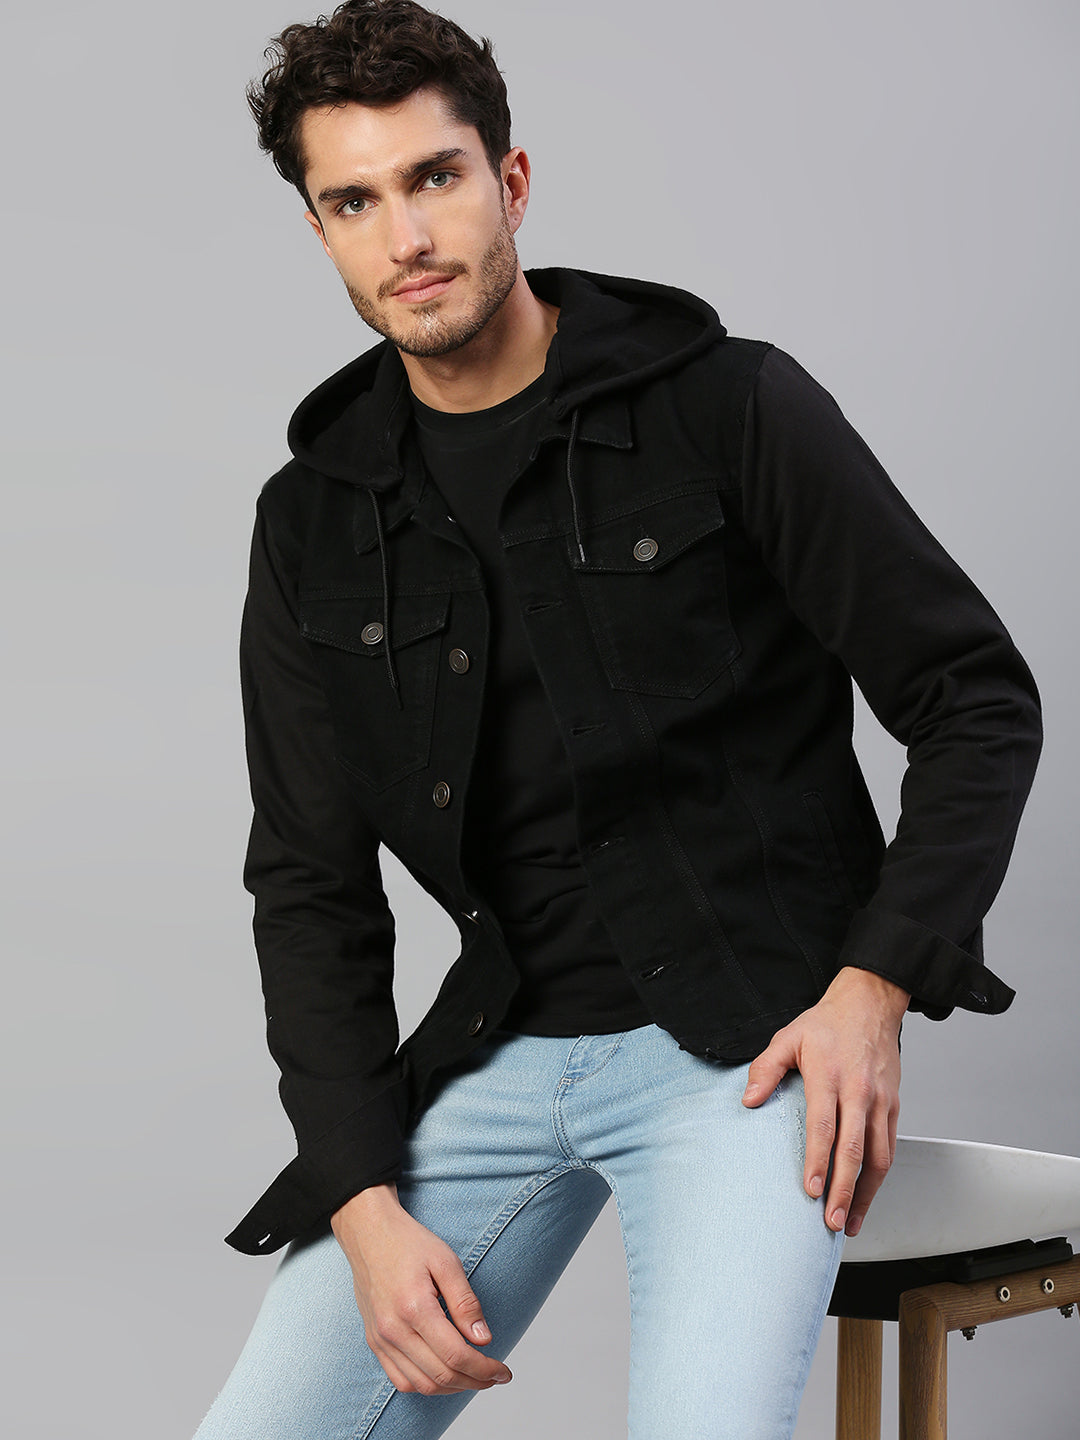 NNNOW.com Sale - hooded denim jackets - Shop Online at Lowest Price in India